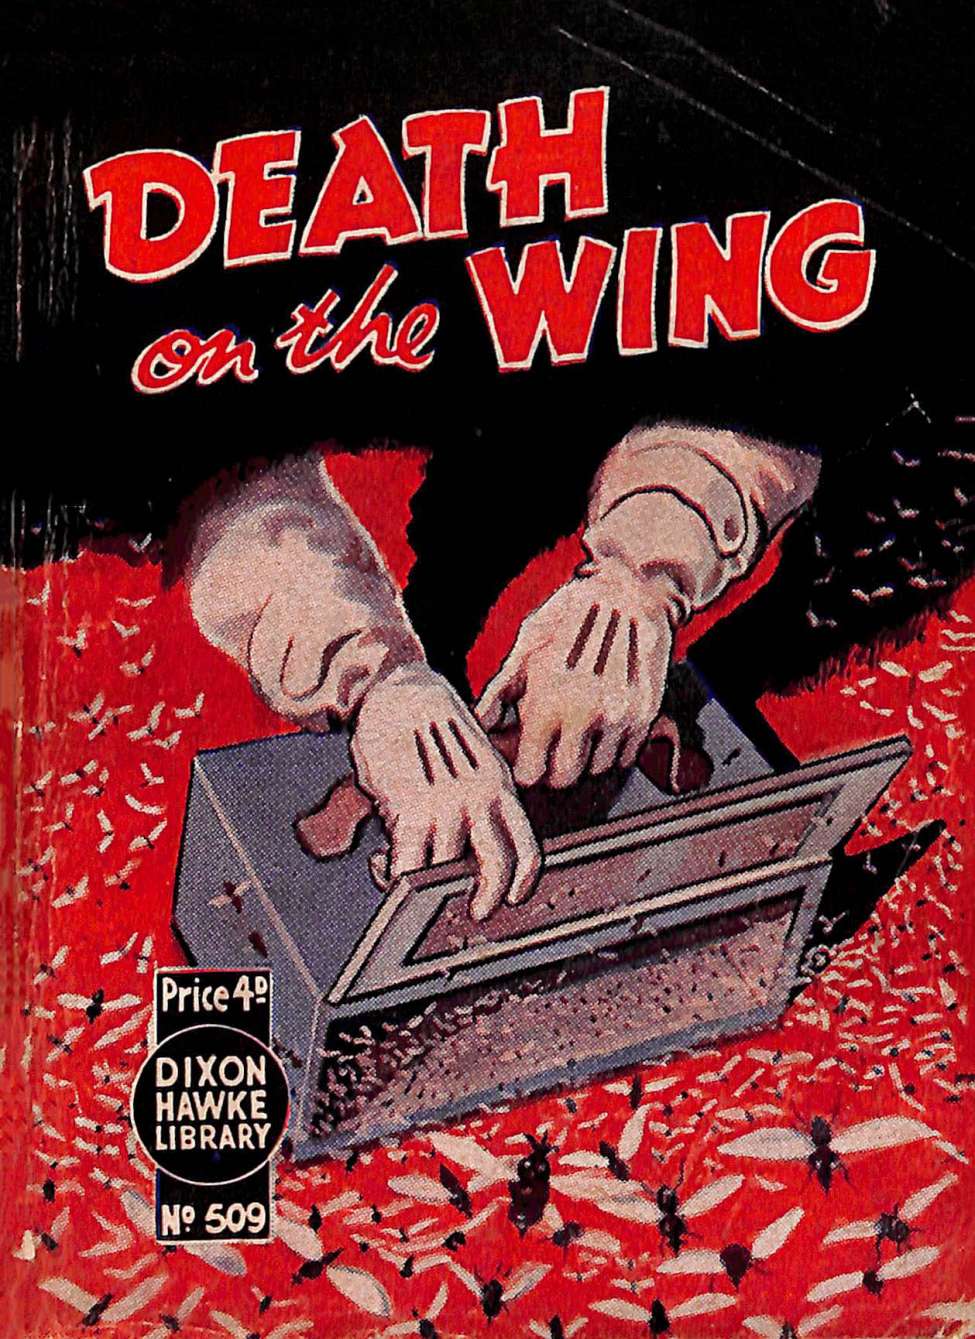 Book Cover For Dixon Hawke Library 509 - Death on the Wing